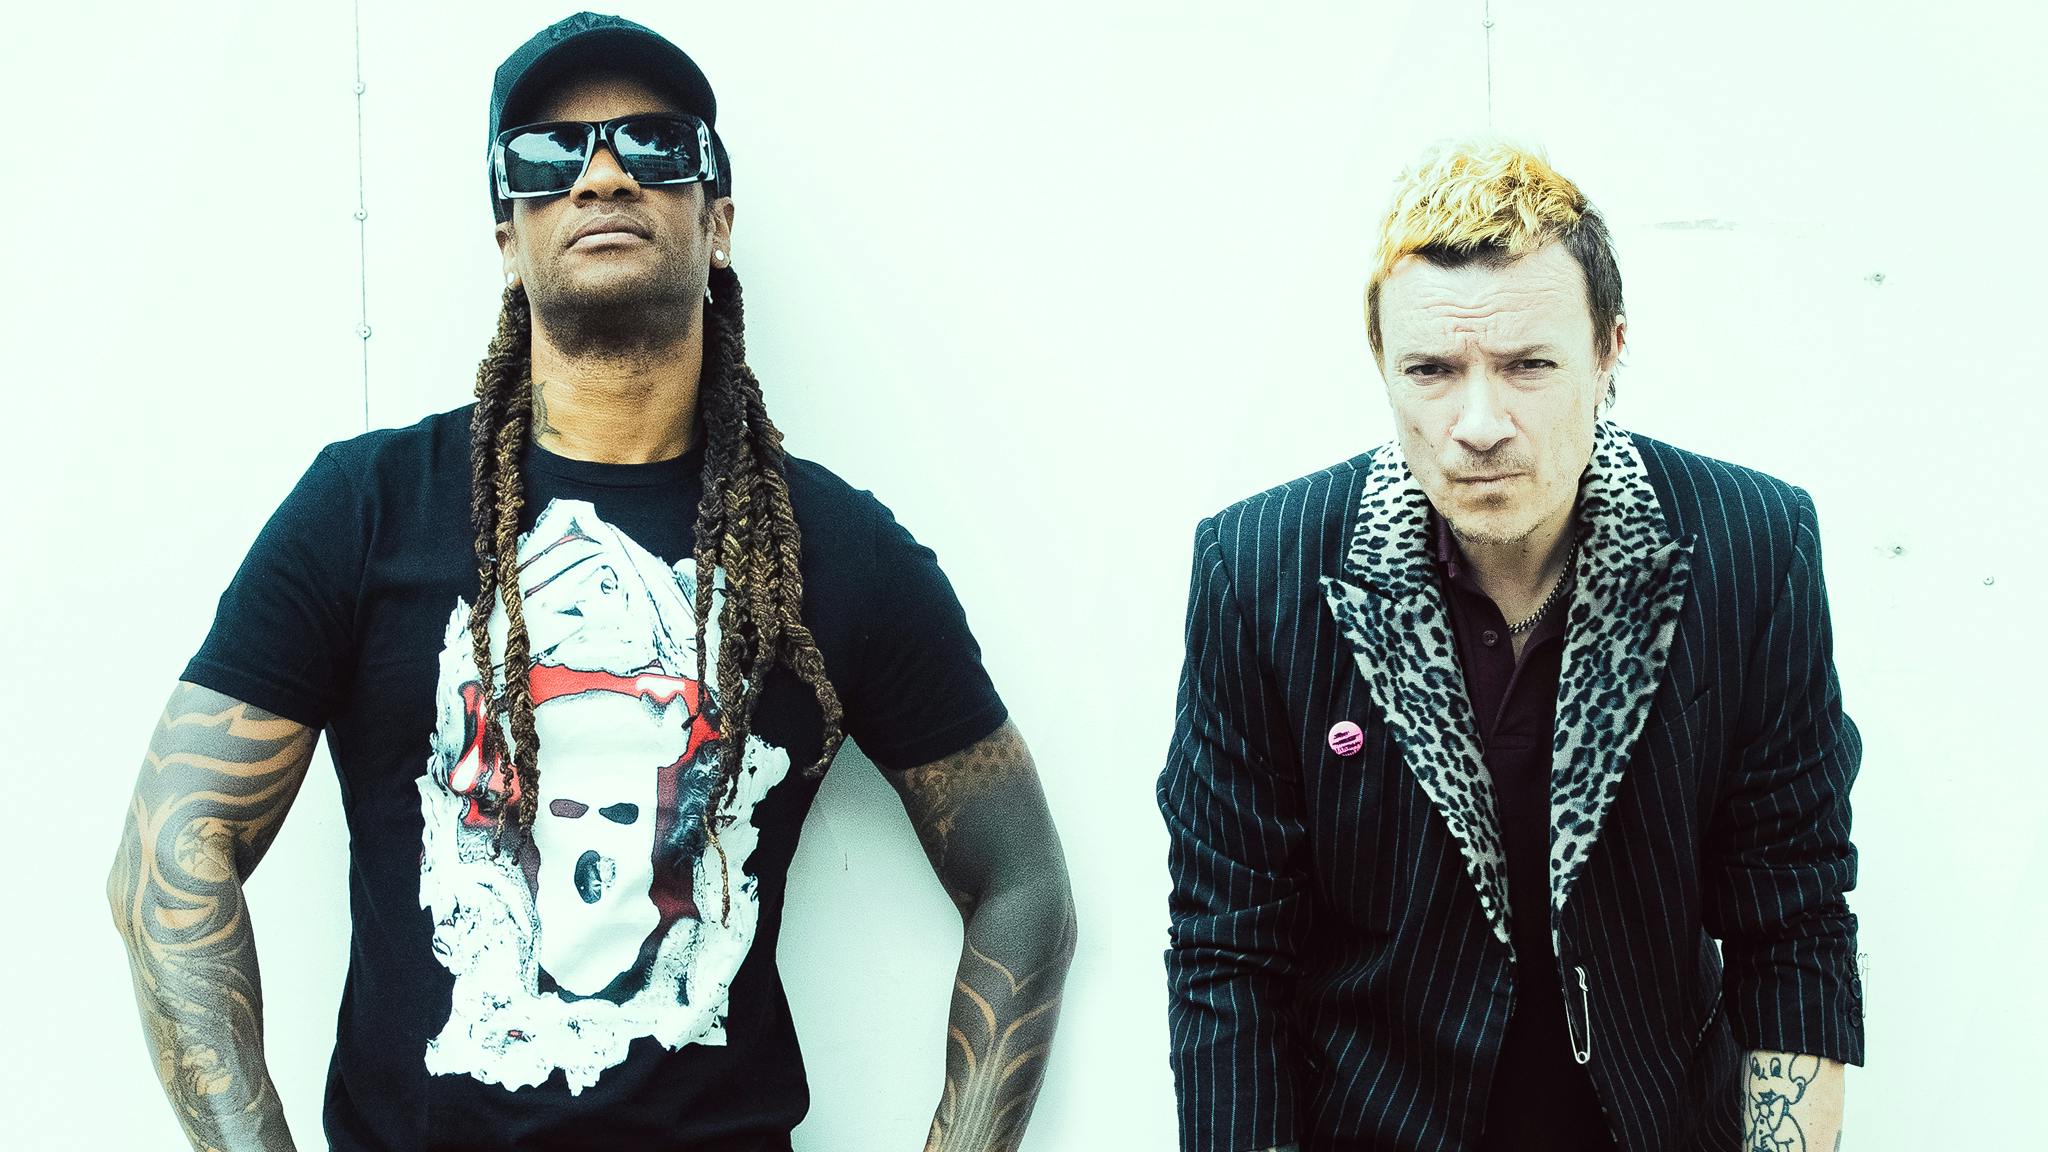 Rock For People 2024 adds The Prodigy, YUNGBLUD, Sum 41 and more to line-up